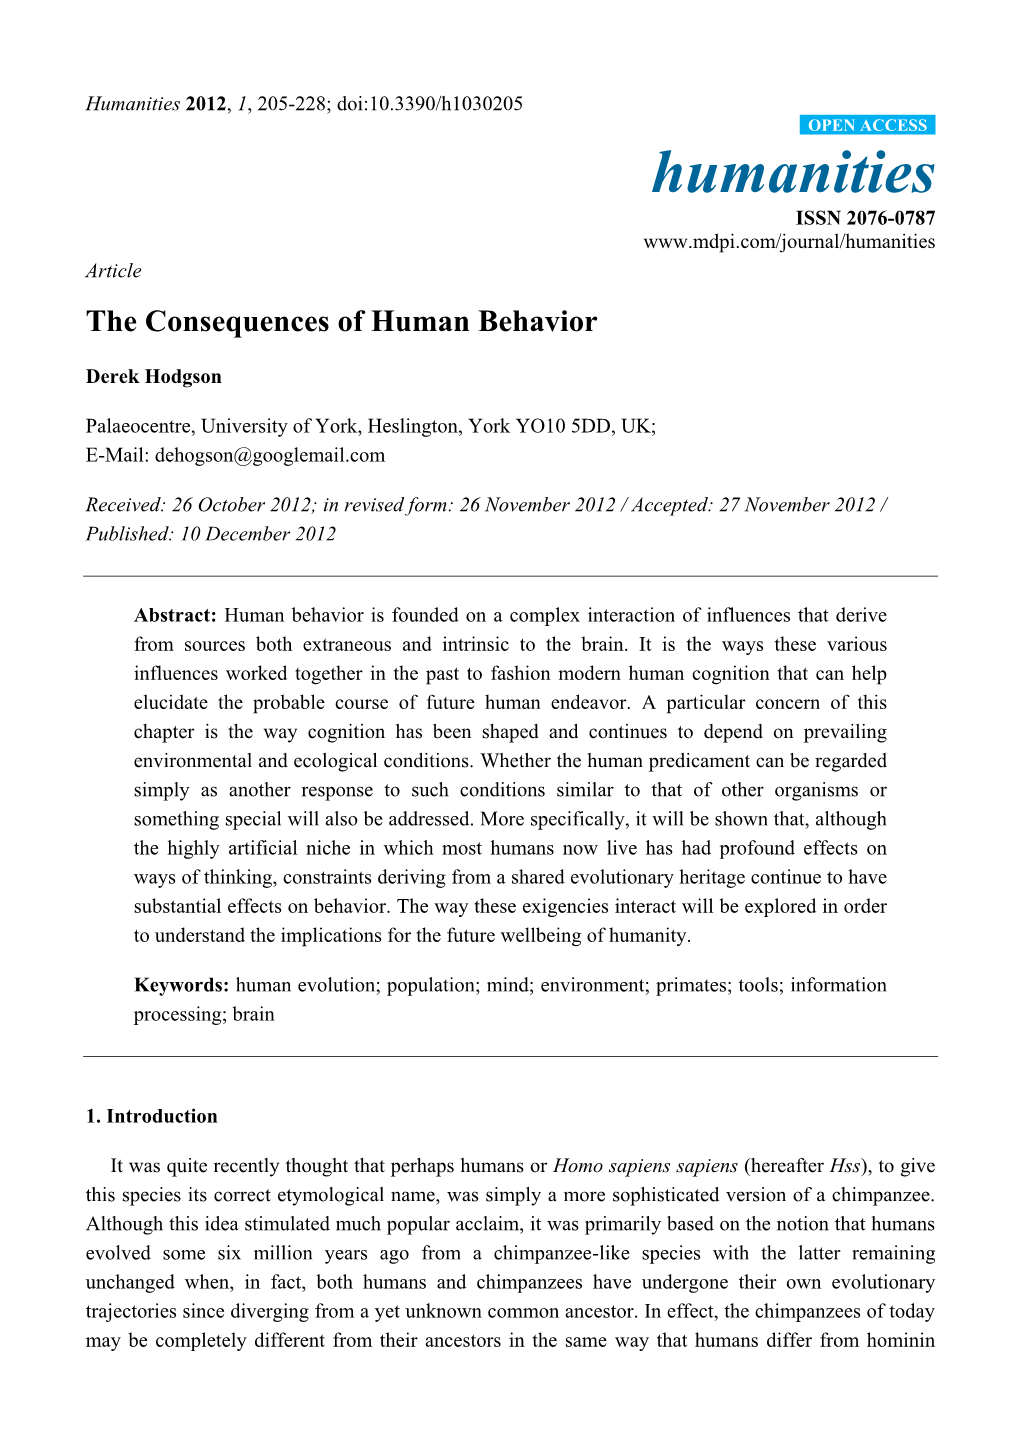 The Consequences of Human Behavior